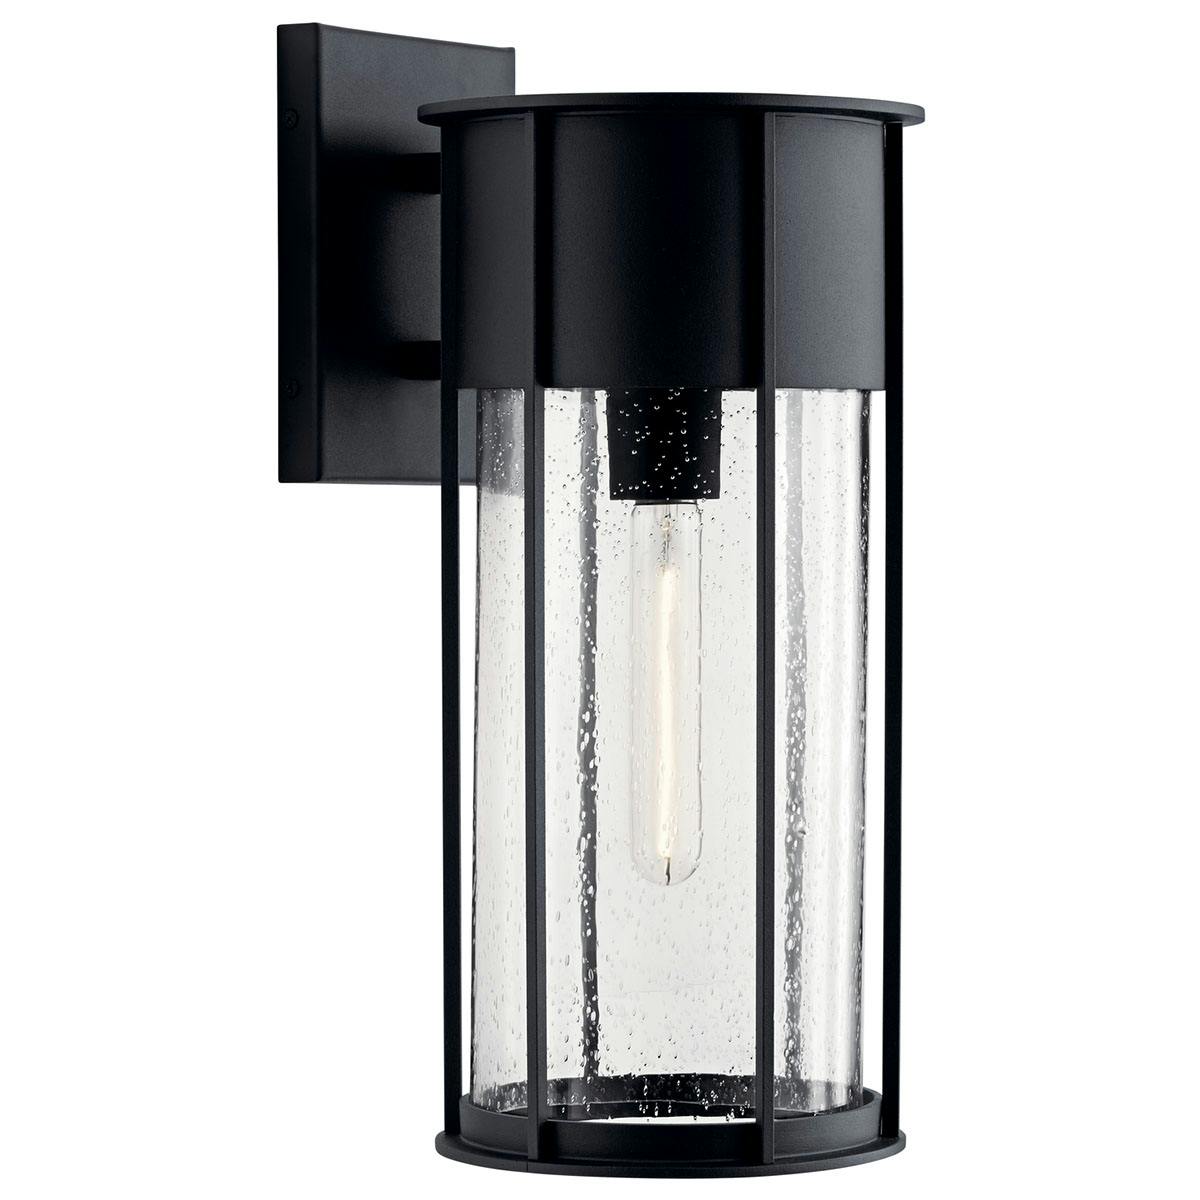 Camillo™ 18" 1 Light  Wall Light Black on a white background